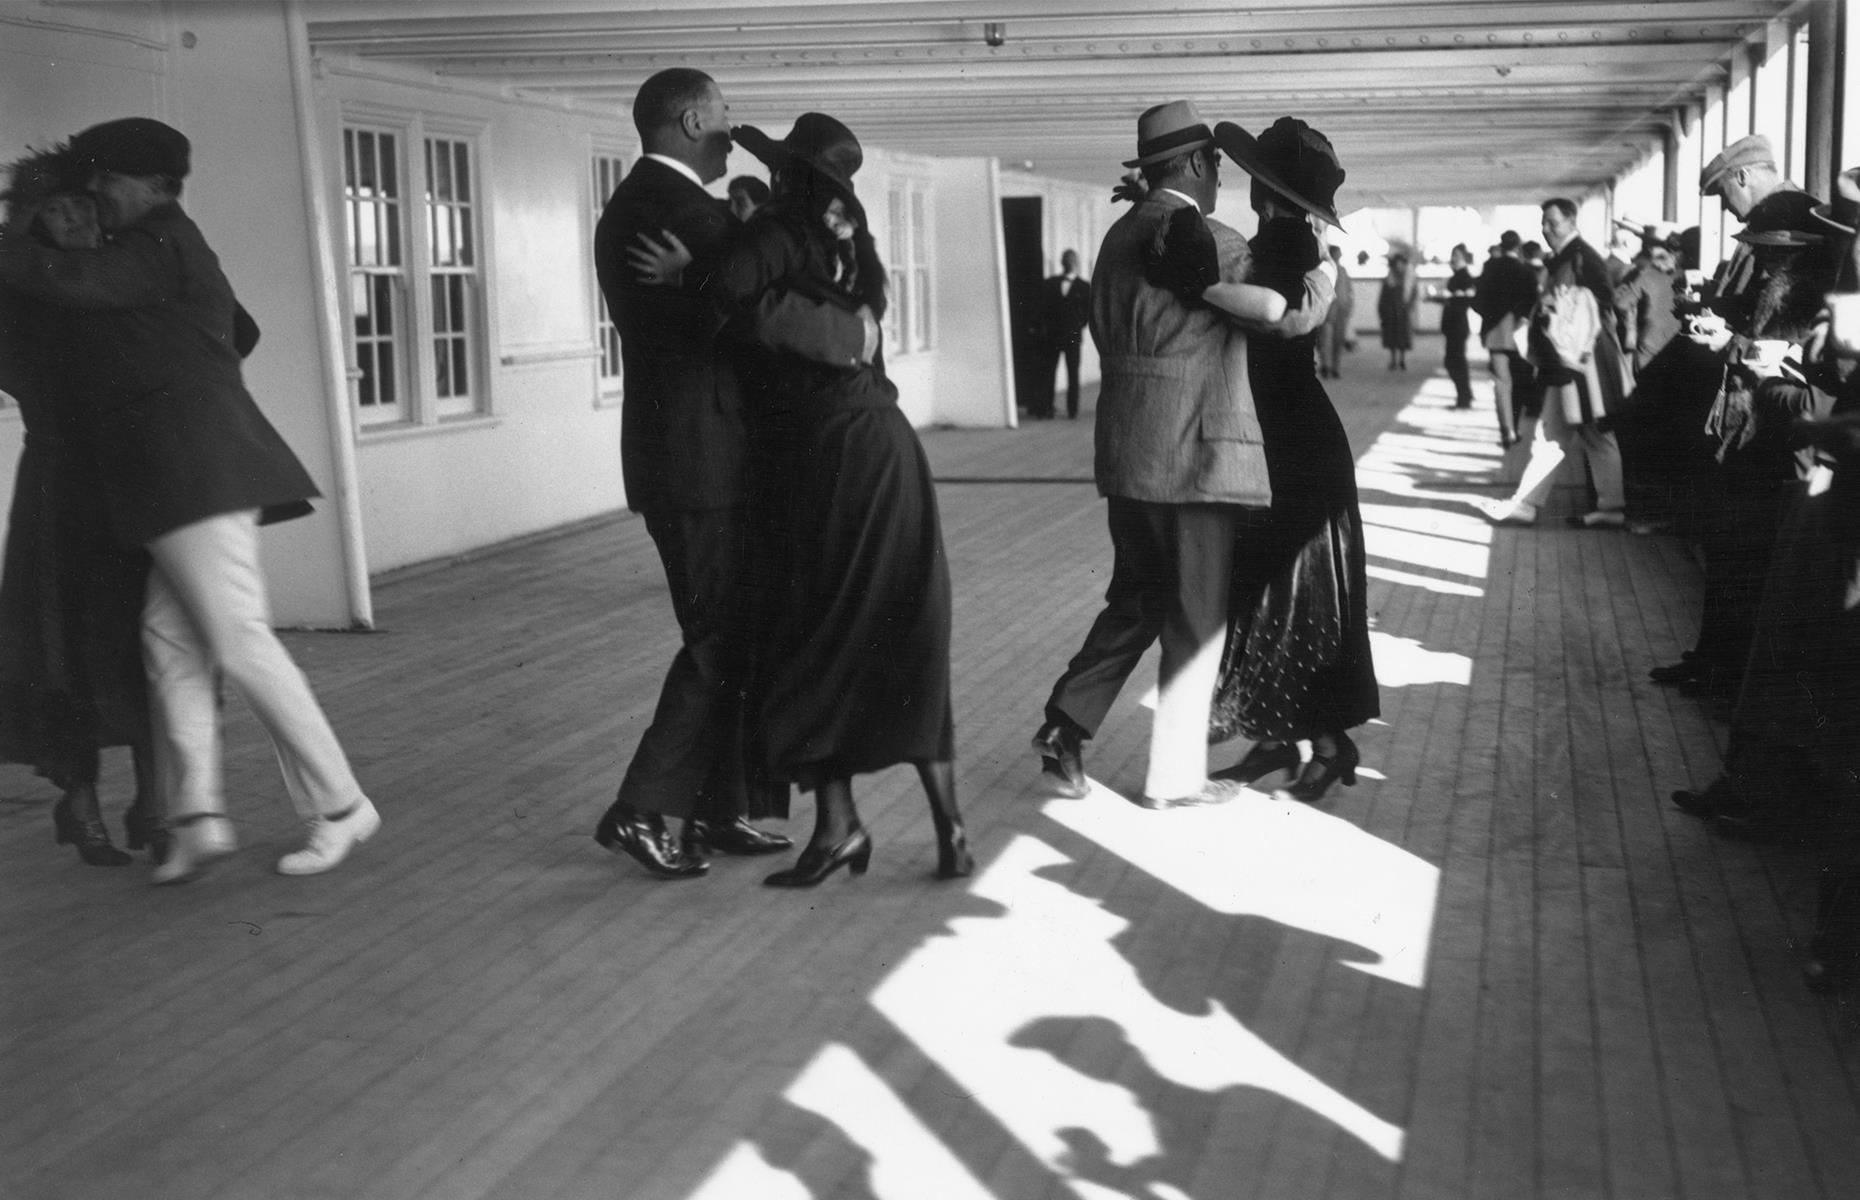 Still, against the odds, the cruise industry managed to keep its head above water and, post-war, the upper echelons of society took to the seas once more. Here affluent travelers dance on the deck of Cunard's Aquitania in 1922.